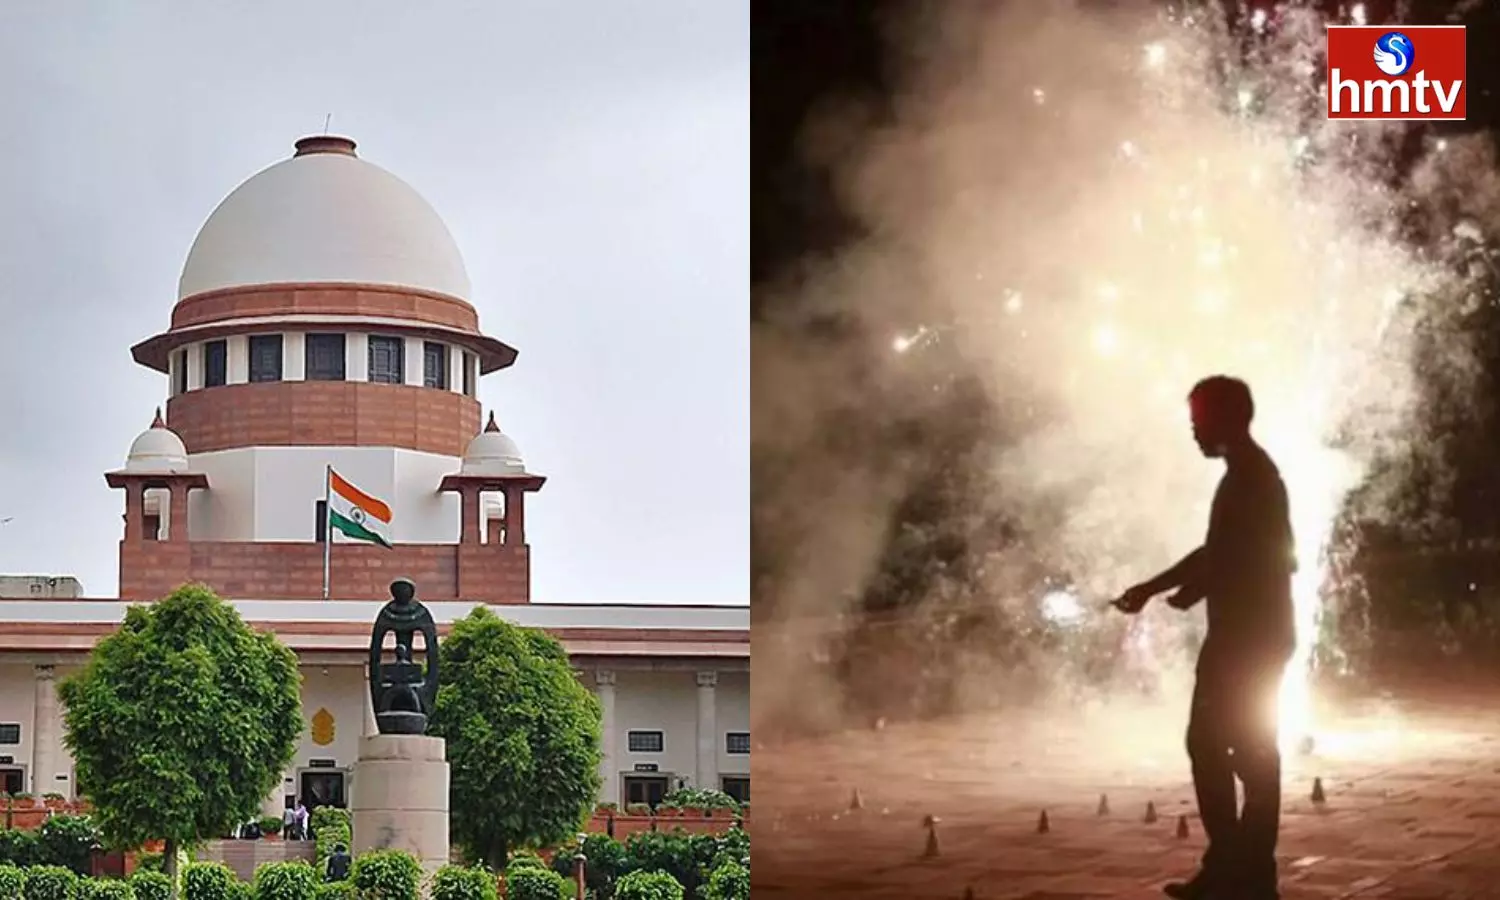 Ban On Polluting Firecrackers Across Country, Not Just Delhi: Supreme Court